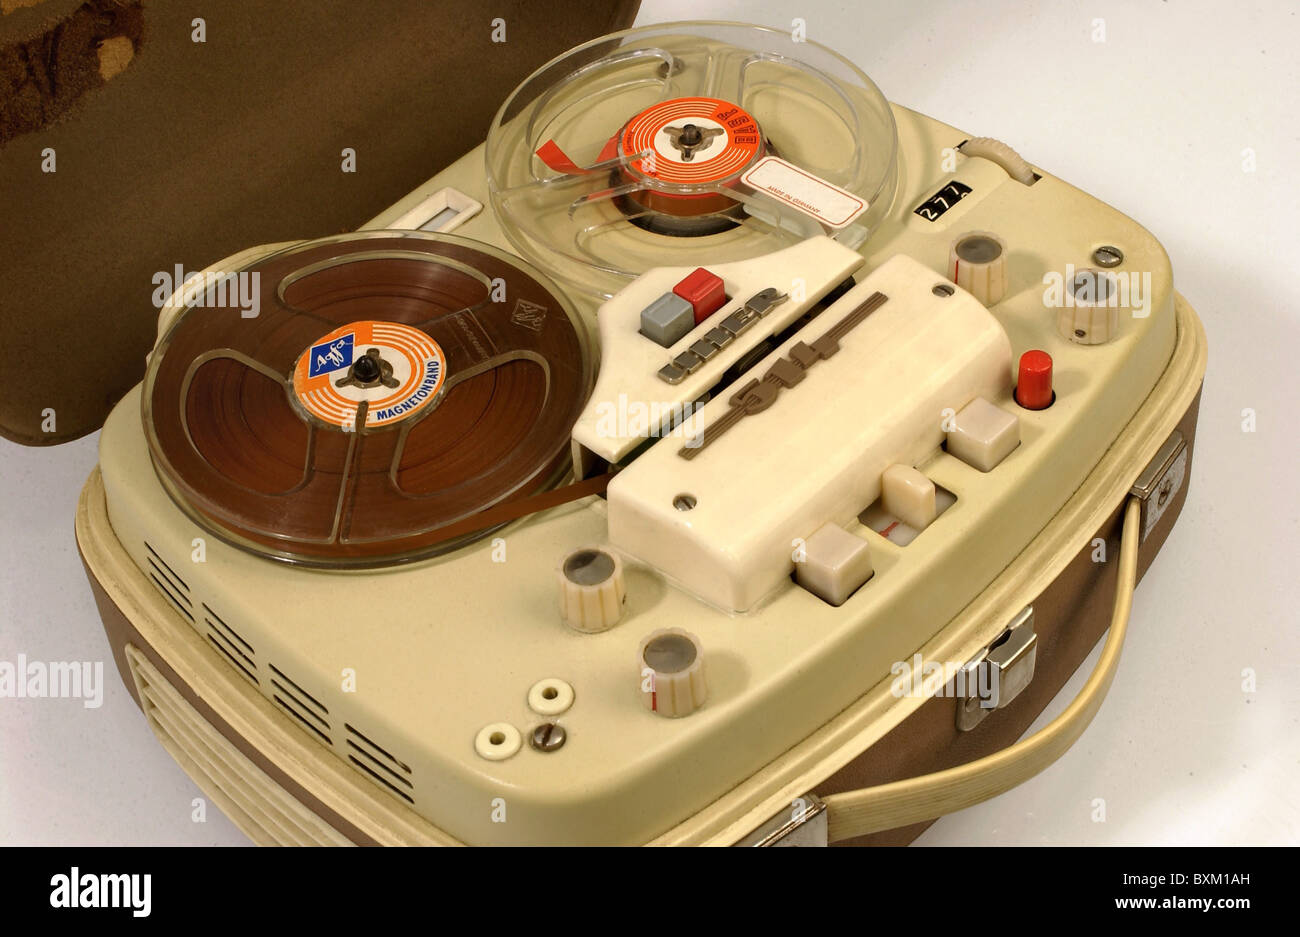 Ferrograph Series 7 reel-to-reel tape recorder. Built late 1960s-early  1970s. Shown with recording heads and control panel covers open Stock Photo  - Alamy